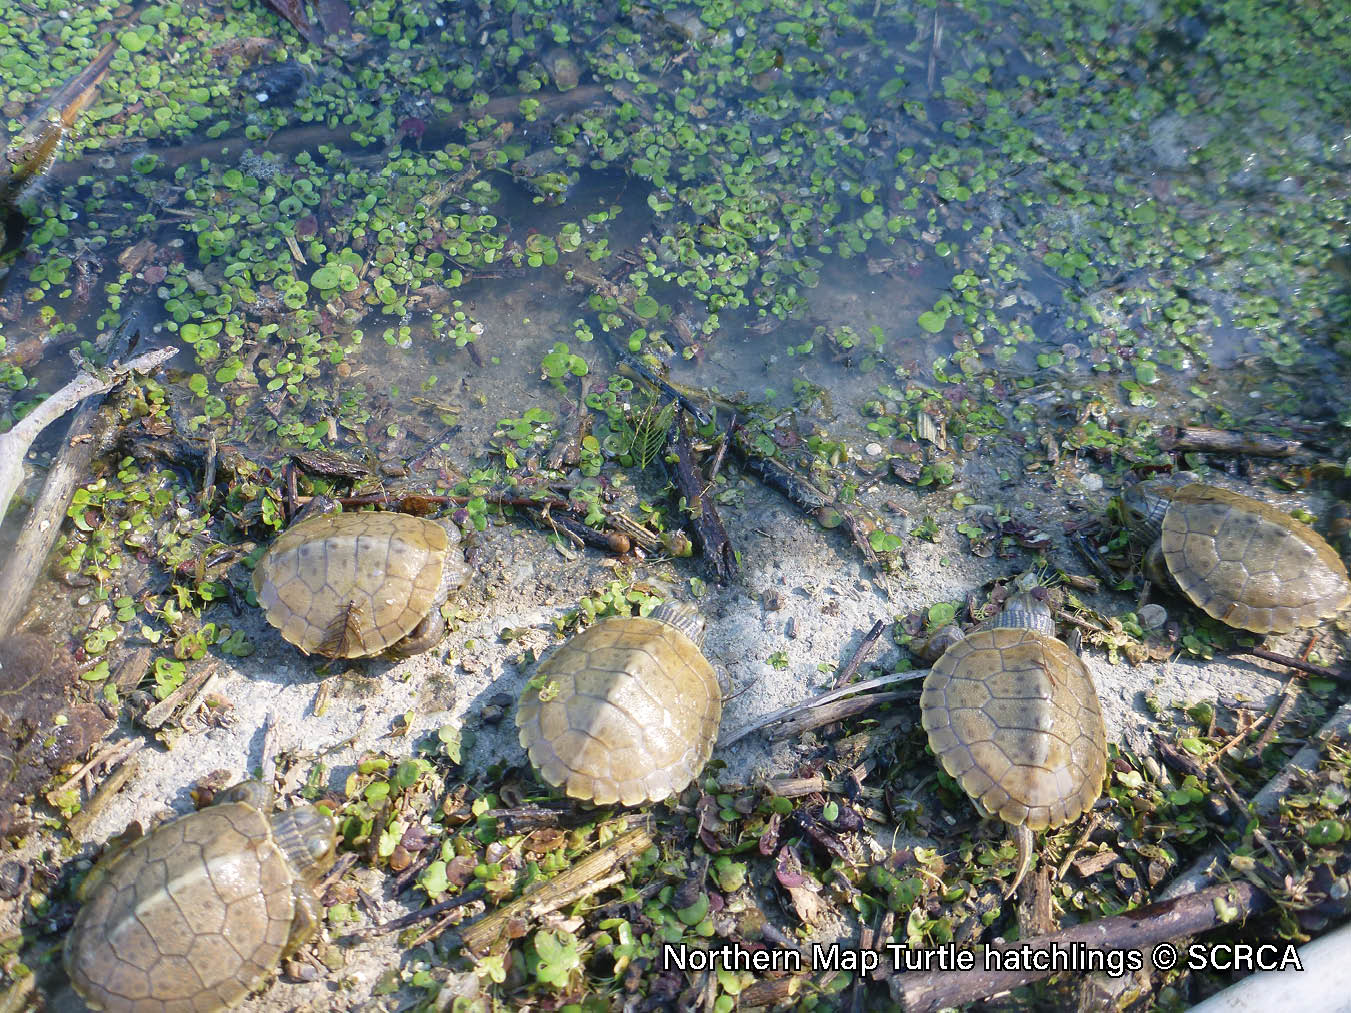 Picture of five Northern Map Turtle hatchlings on a riverbank entering the water. The turtle has a brown shell with a yellow contour line pattern, a ridge down the midline of its shell, and the back edge is serrated. It has yellow lines on its neck and a yellow spot behind its eye.